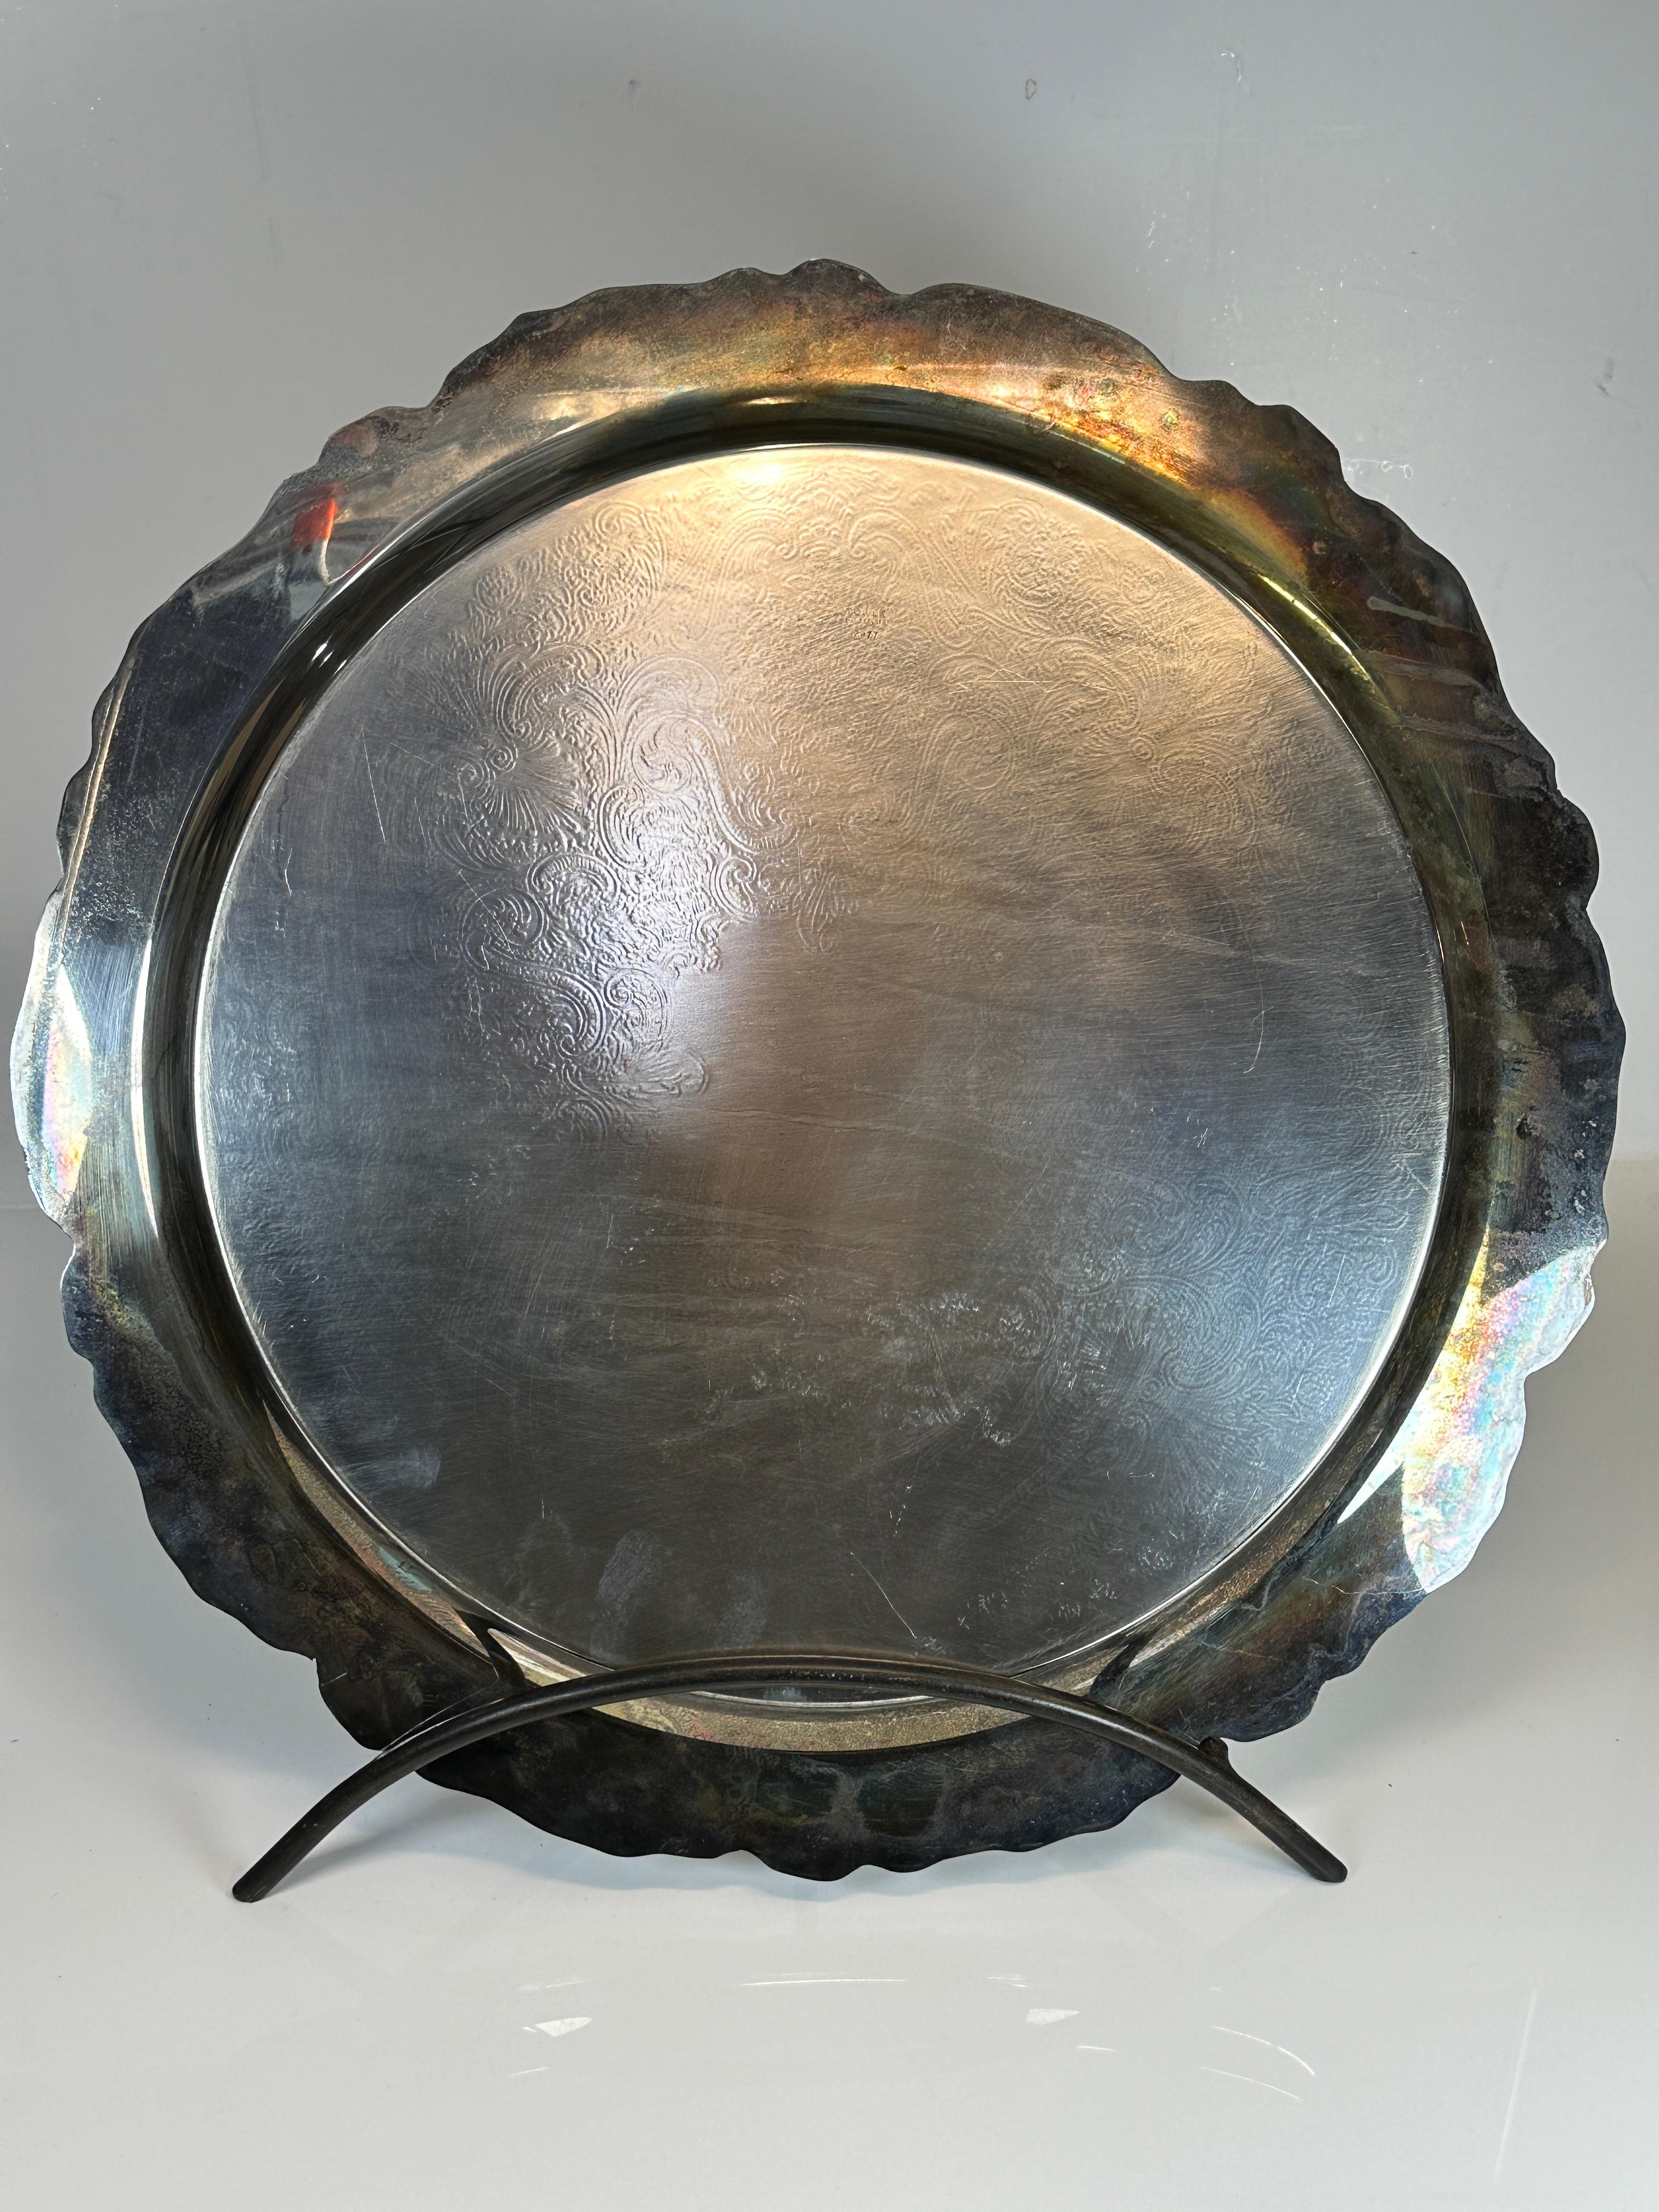 Vintage TOWLE Ornate Silver Plate Round Serving Tray Dish Platter